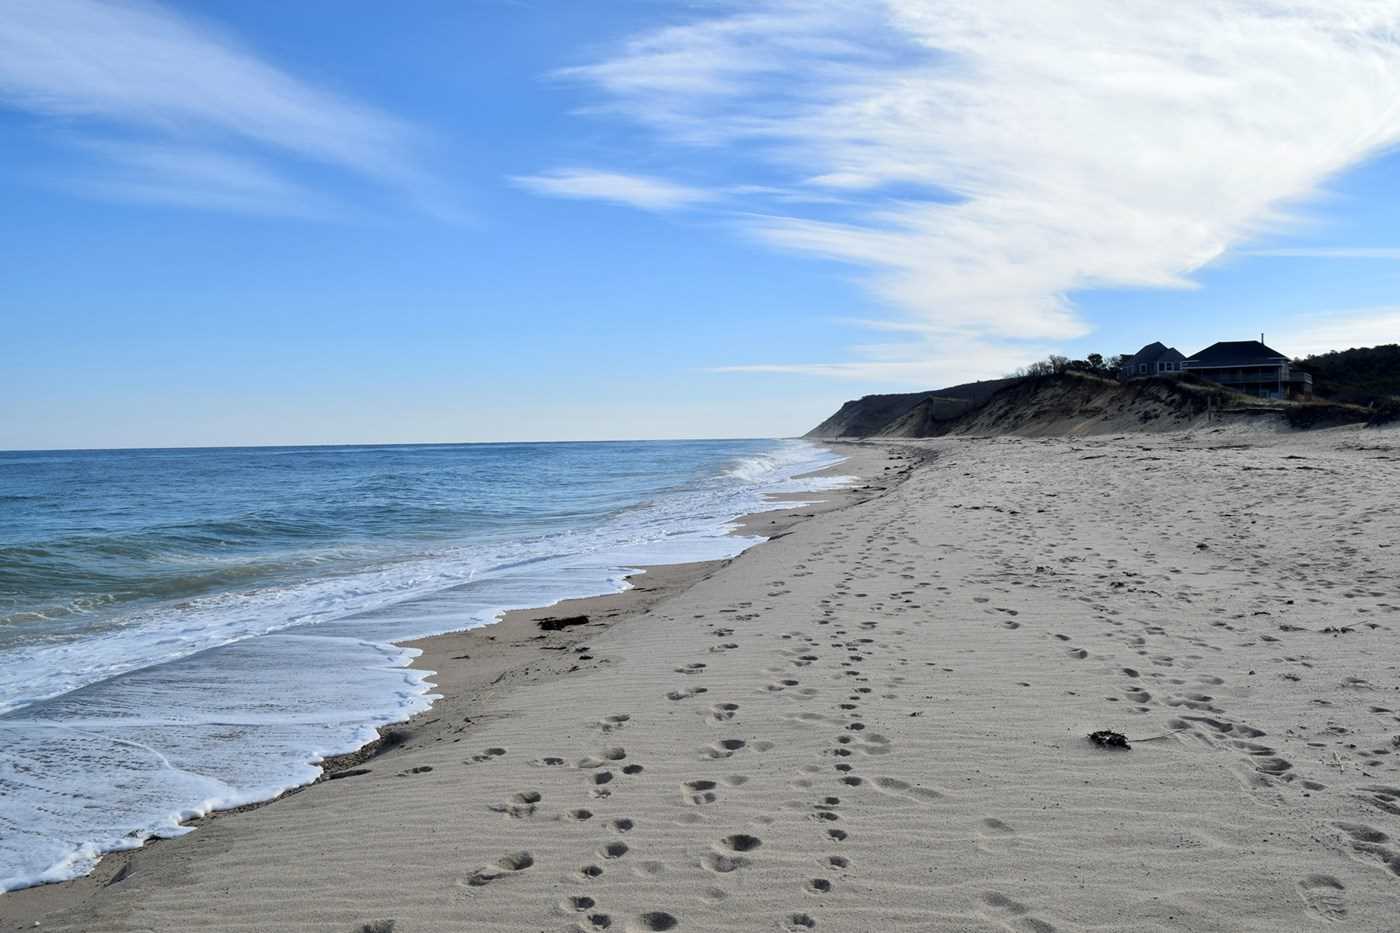 Ballston Beach is one of the closest beaches to the house